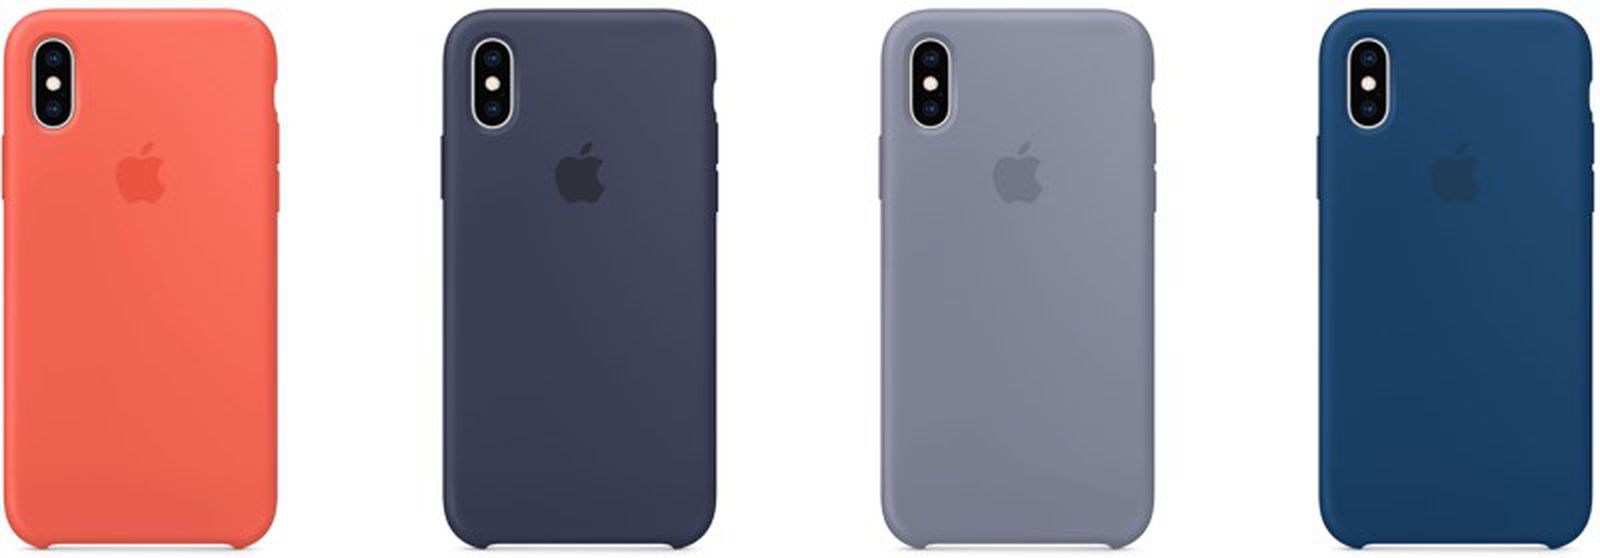 Apple Releases New Cases for iPhone XS and XS Max - MacRumors